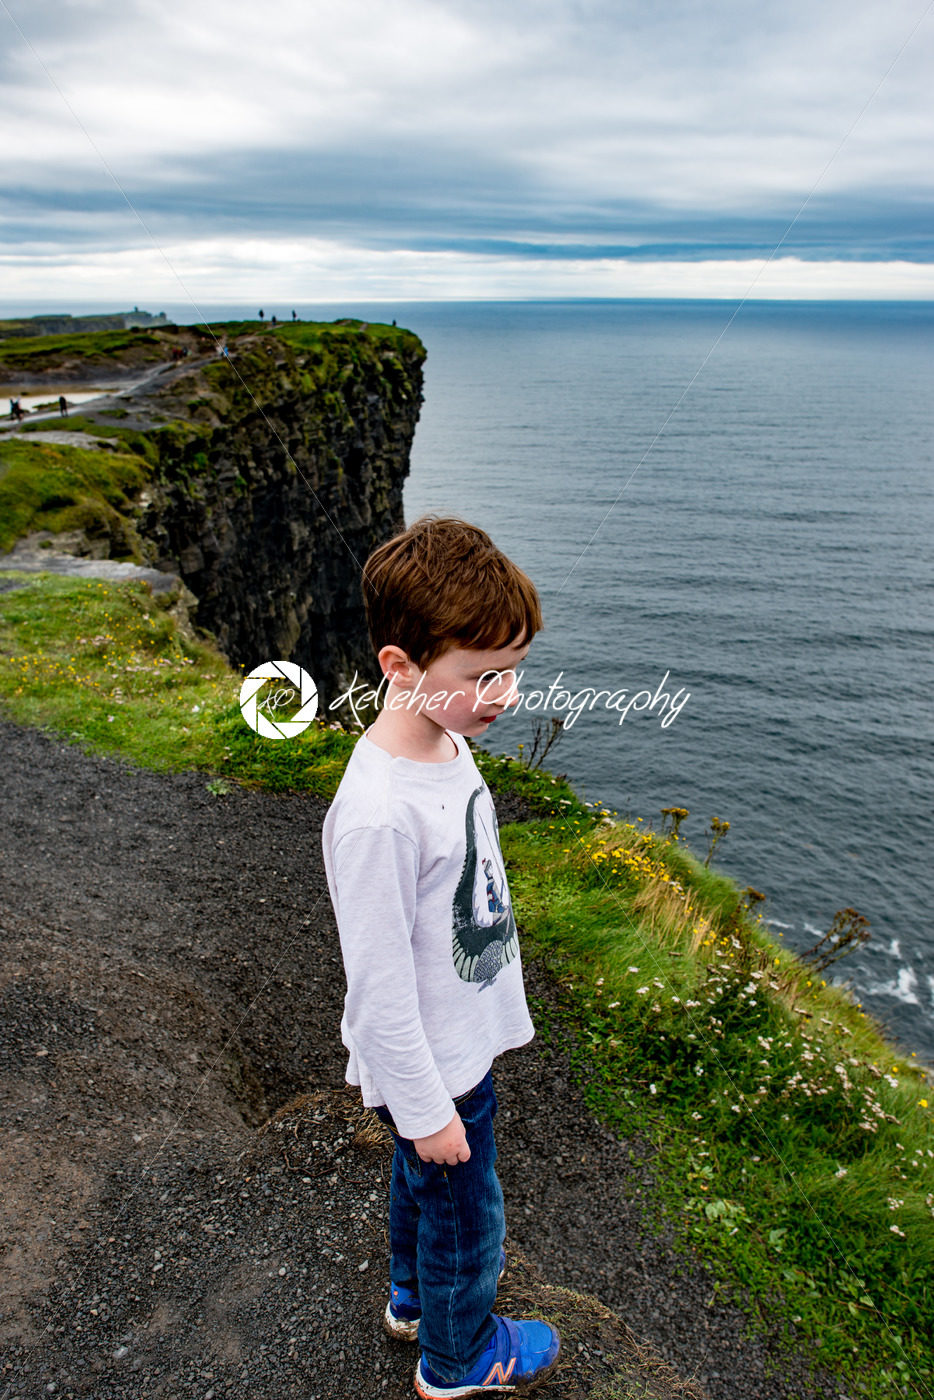 Boy looking out up the Cliffs of Moher Tourist Attraction in Ireland - Kelleher Photography Store